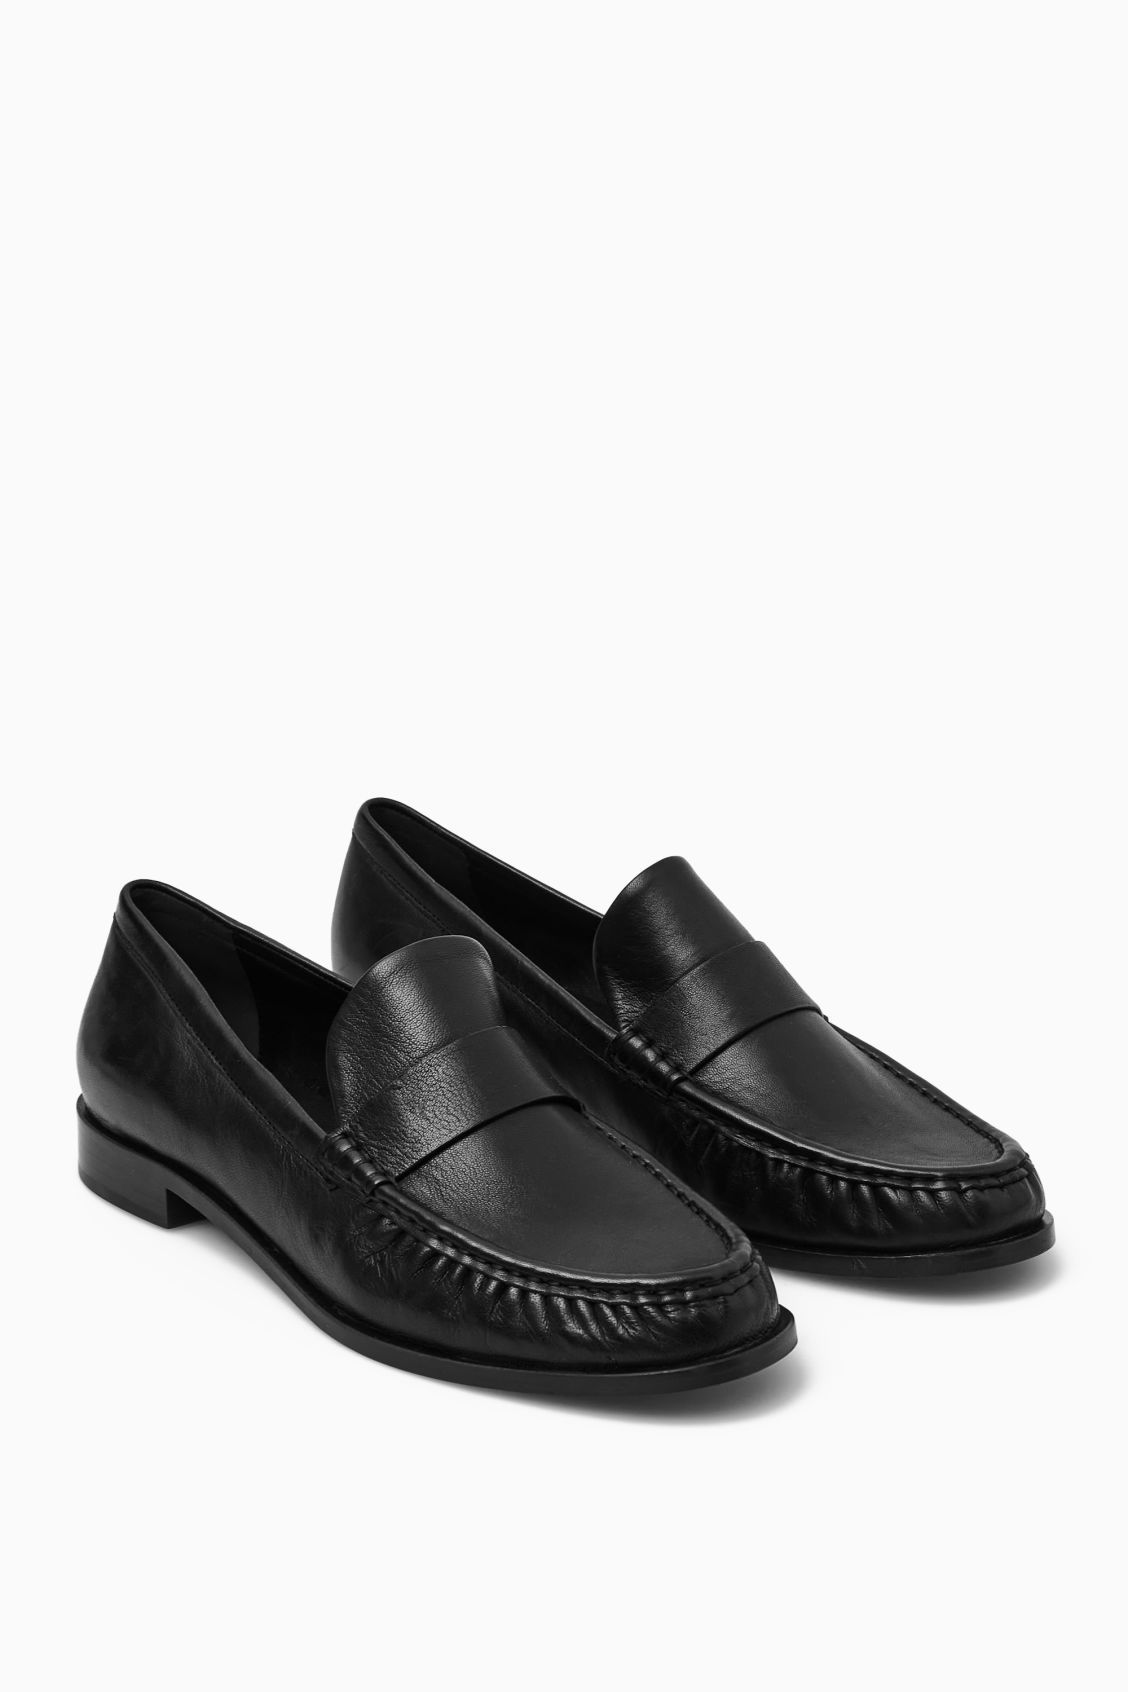 LEATHER LOAFERS | COS UK